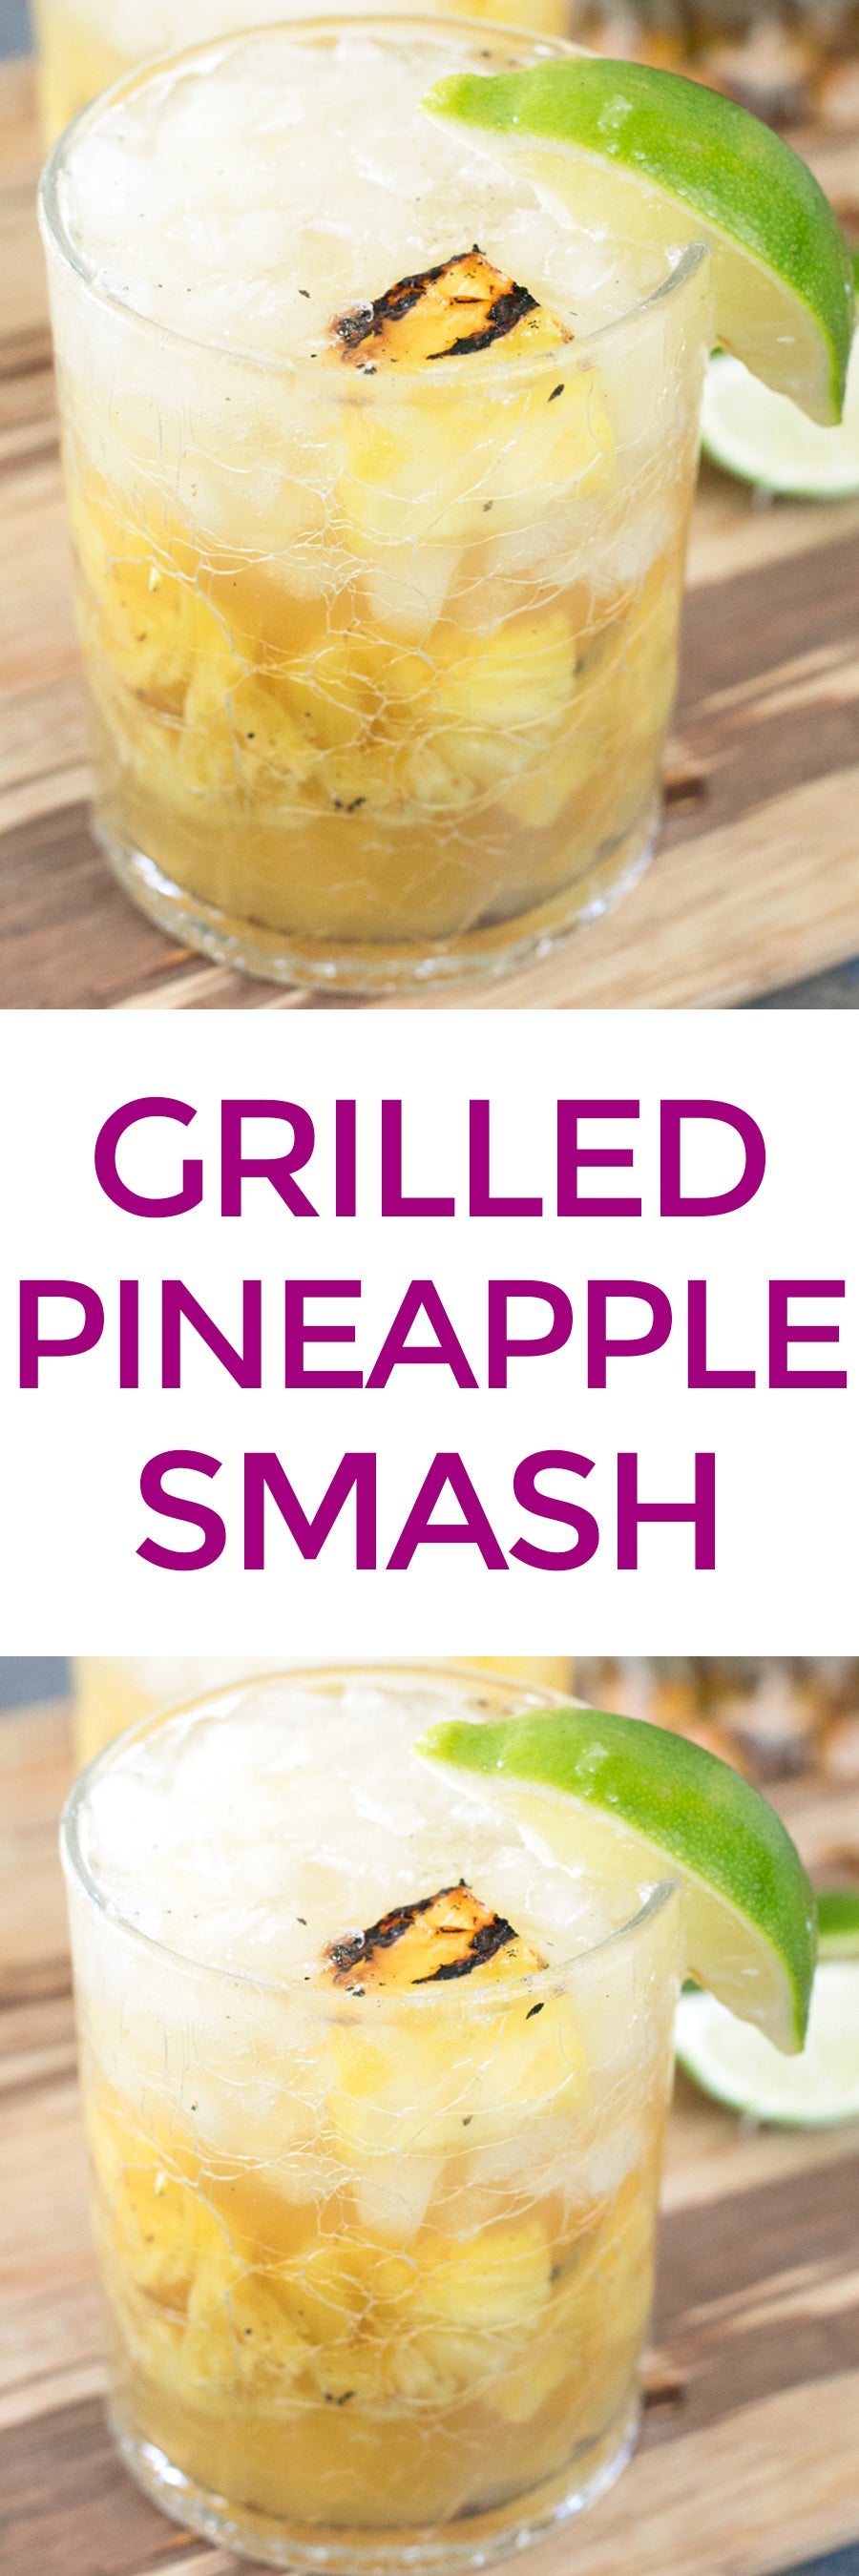 Grilled Pineapple Smash | pigofthemonth.com #grilled #pineapple #cocktail